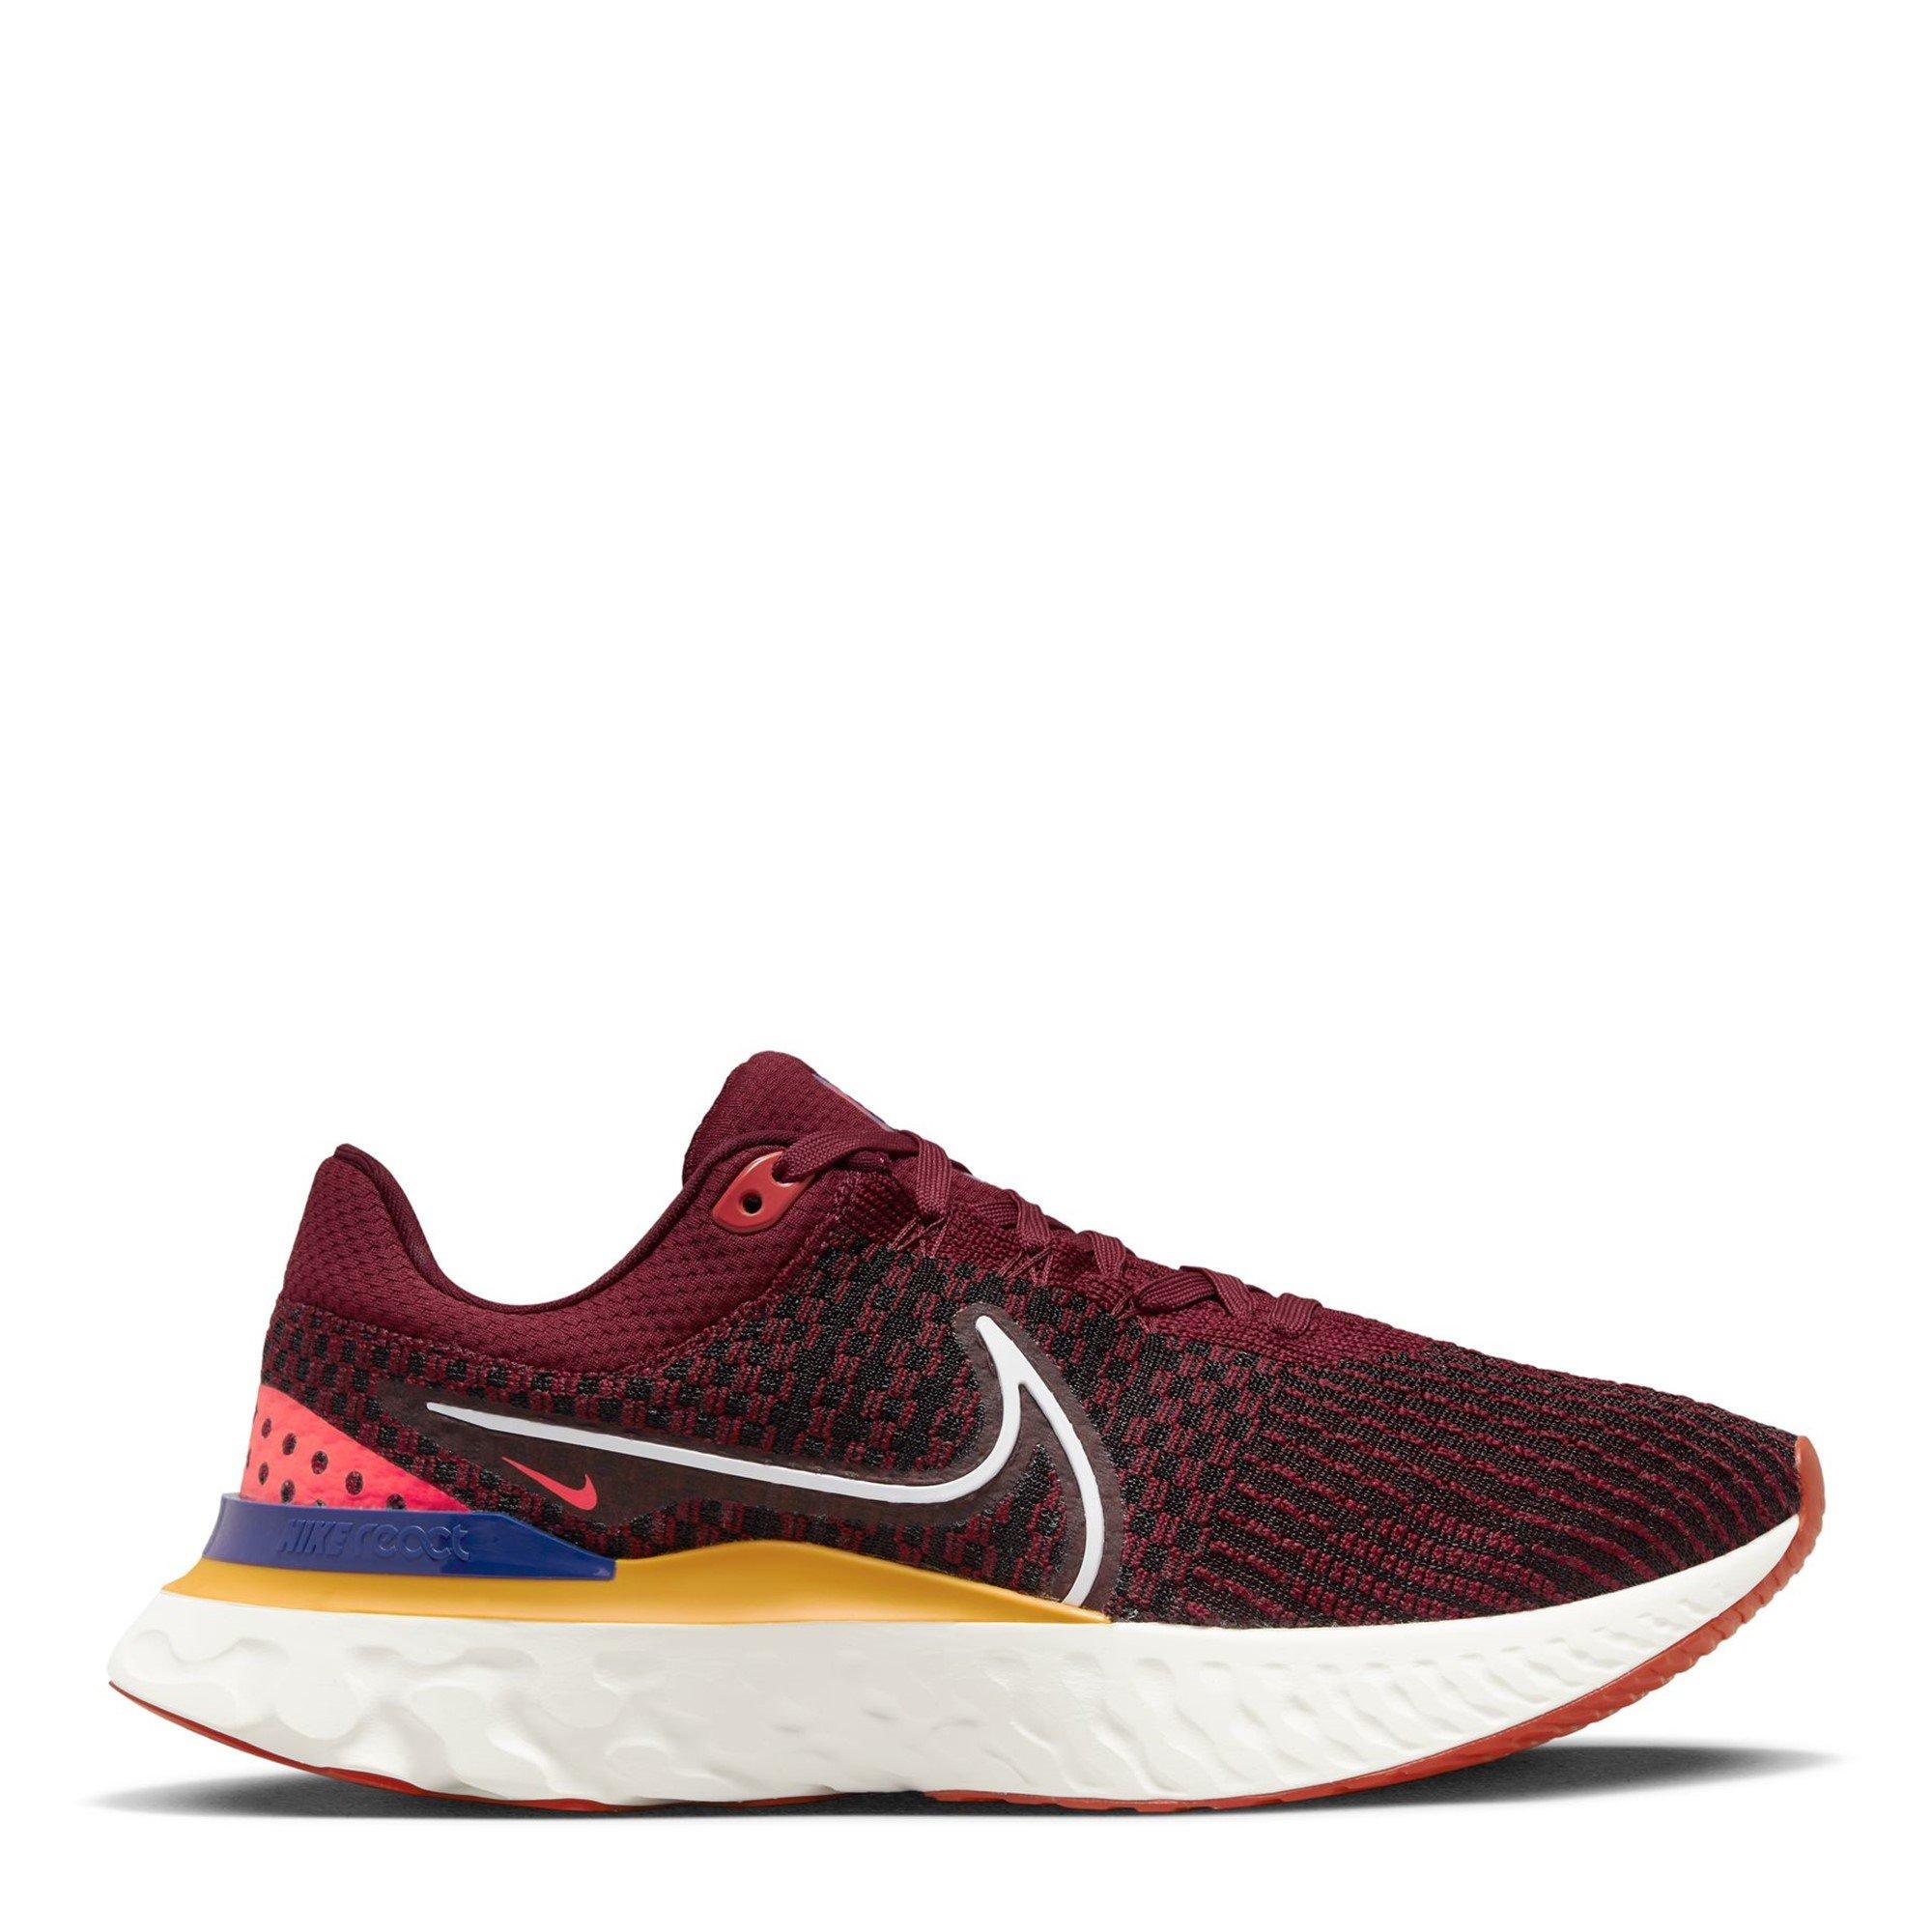 Nike | React Infinity Run Flyknit 3 Mens Running Shoes | Everyday ...